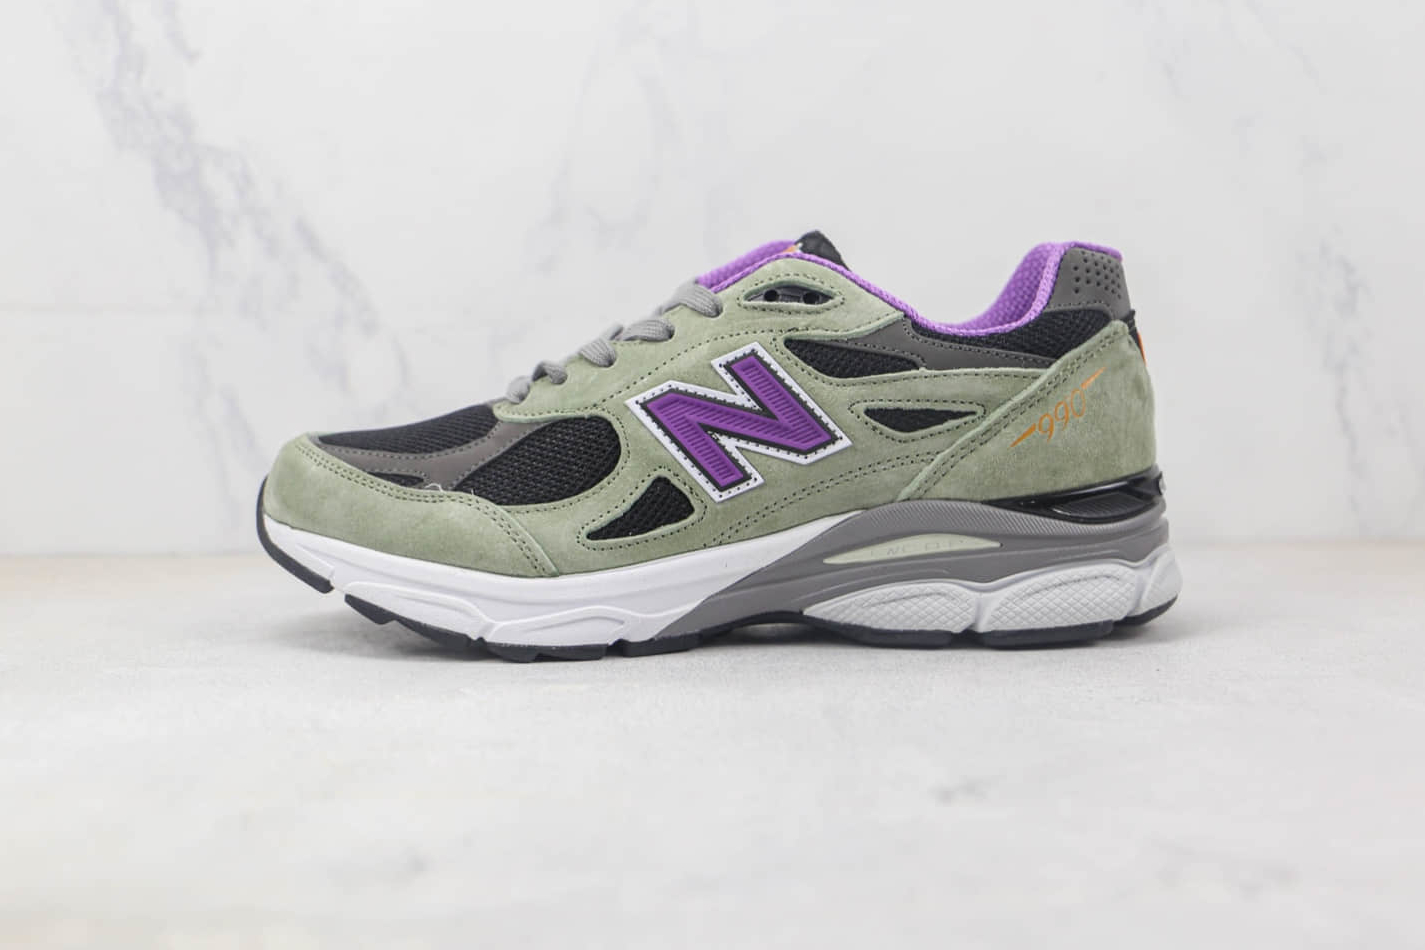 New Balance Teddy Santis x 990v3 'Olive Leaf' M990TC3 - Premium collaboration sneaker with timeless style and unbeatable comfort